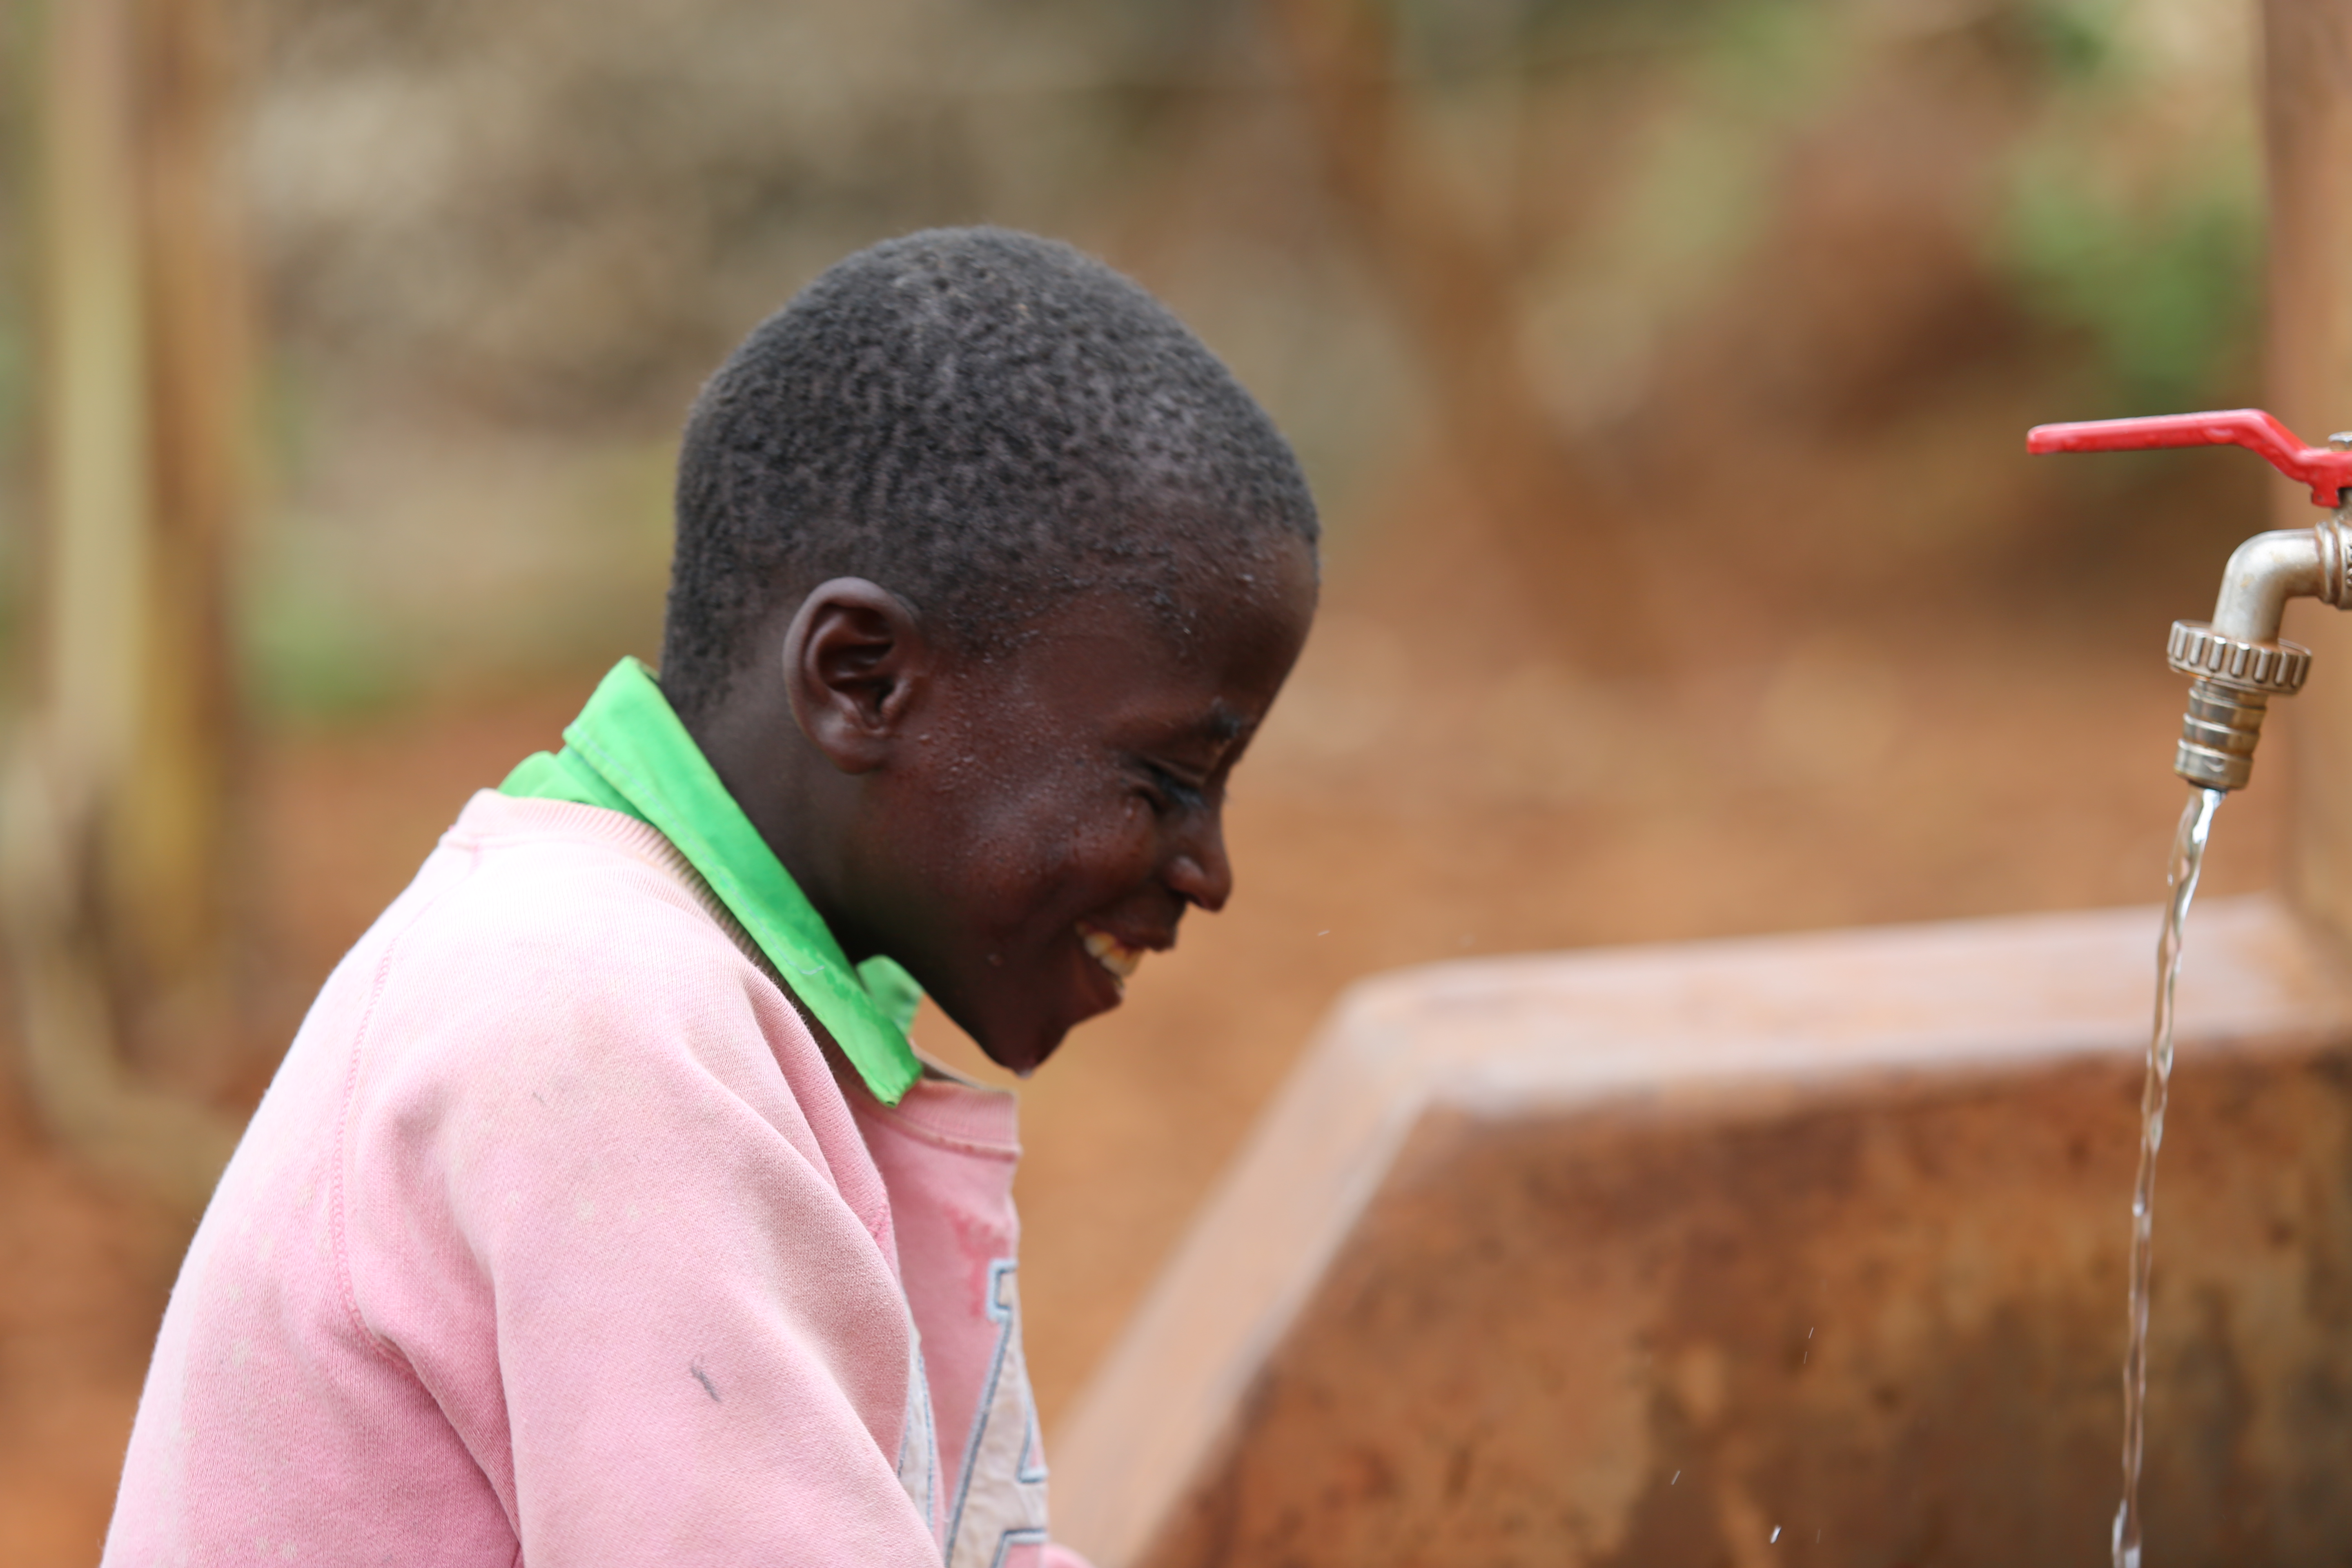 Emmanuel filled with joy as he fetches clean water